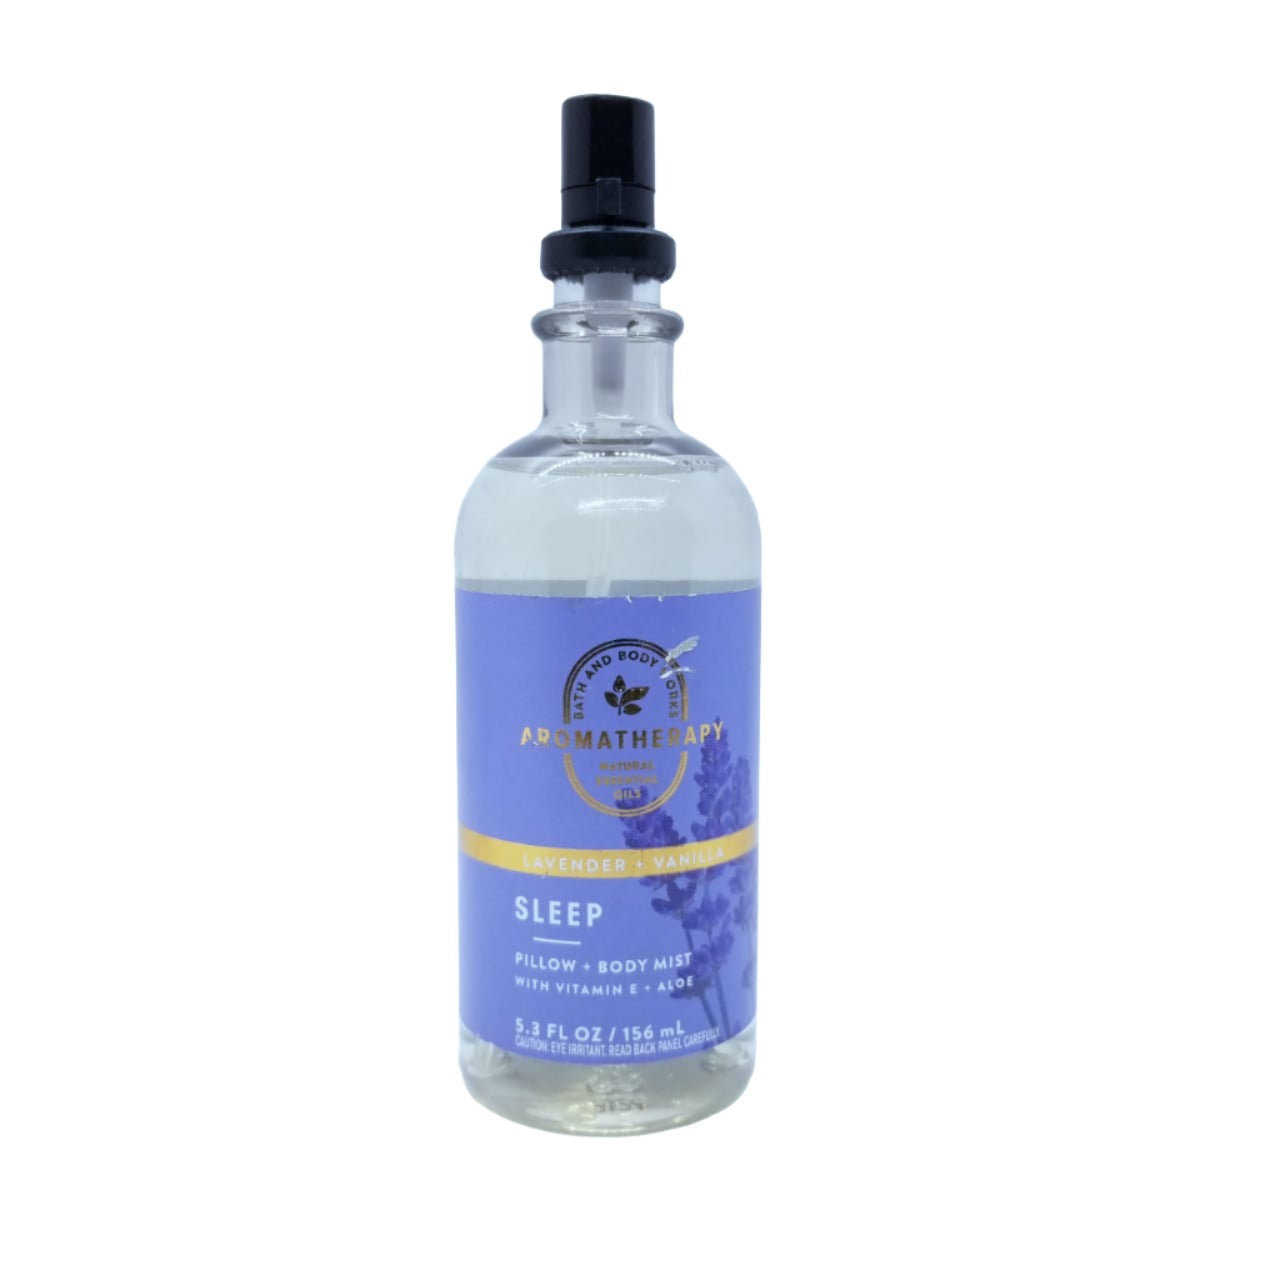 Essential Oil Mist, with Natural Essential Oils, Aromatherapy, 156ml, Bath & Body Works